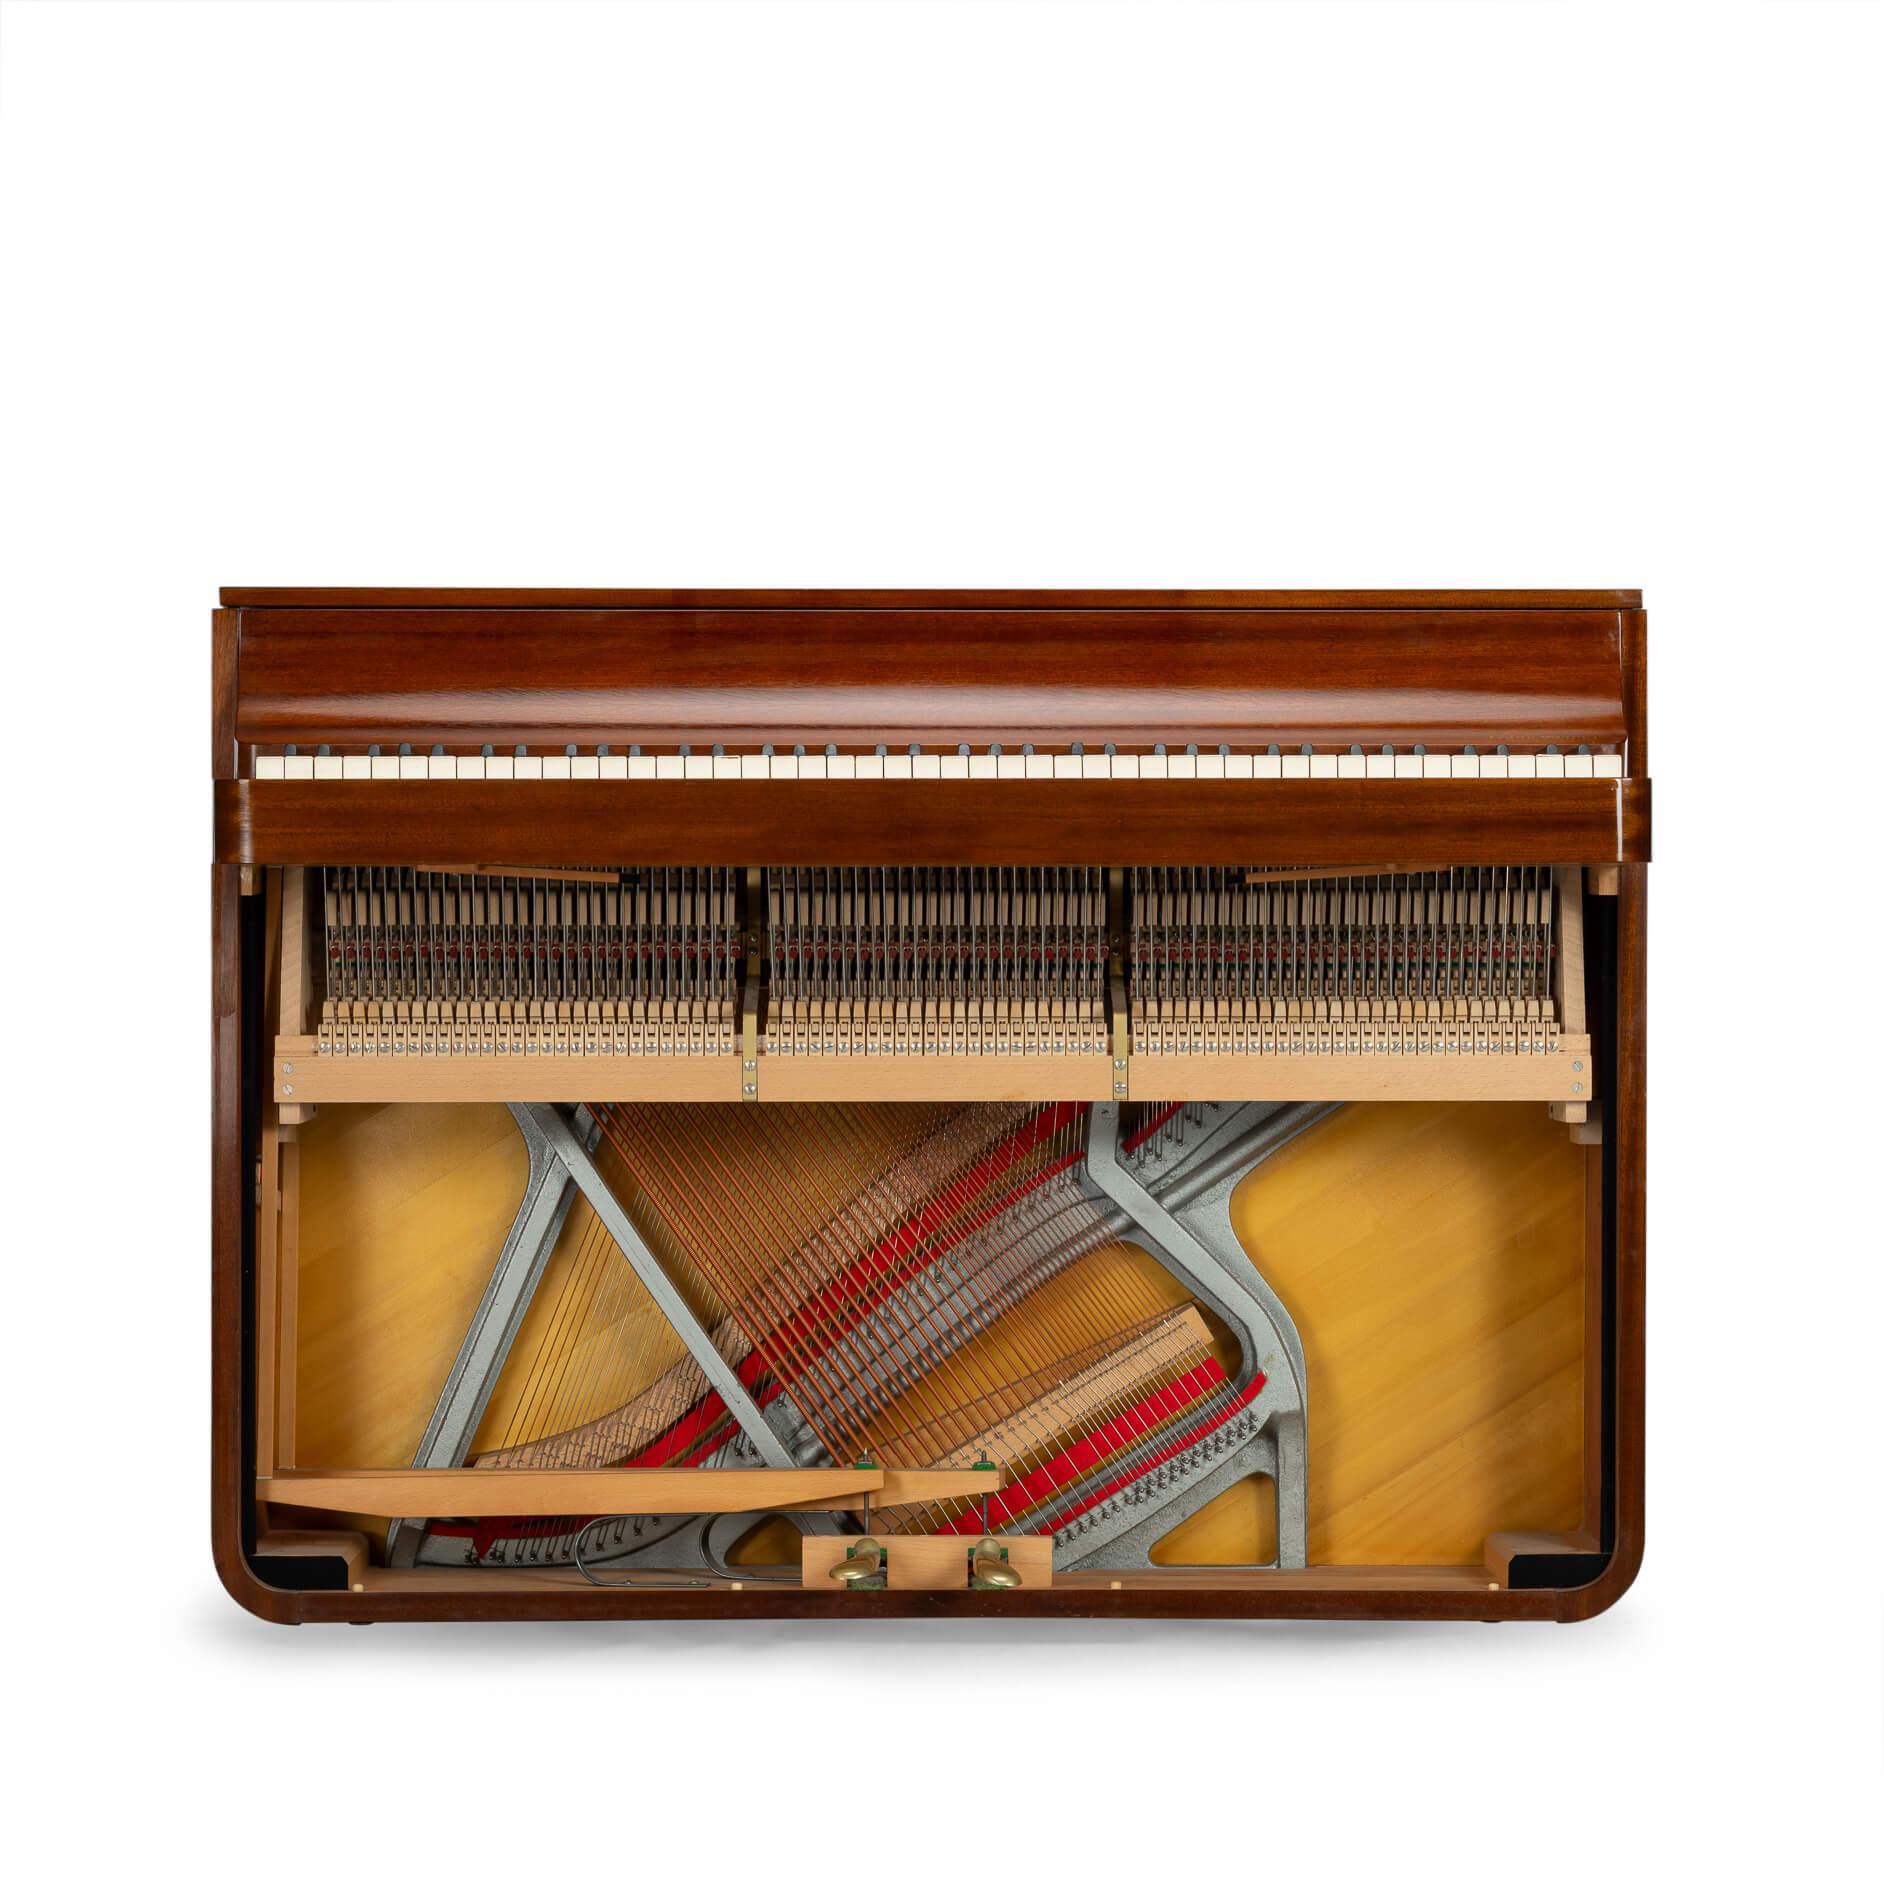 Danish design
A rare Danish midcentury pianette made of mahogany. It is called pianette due to the 82 keys rather than the standard 88 of a full size piano. This pianette is made by renowned piano maker Louis Zwicki. Every piano from Louis Zwicki is